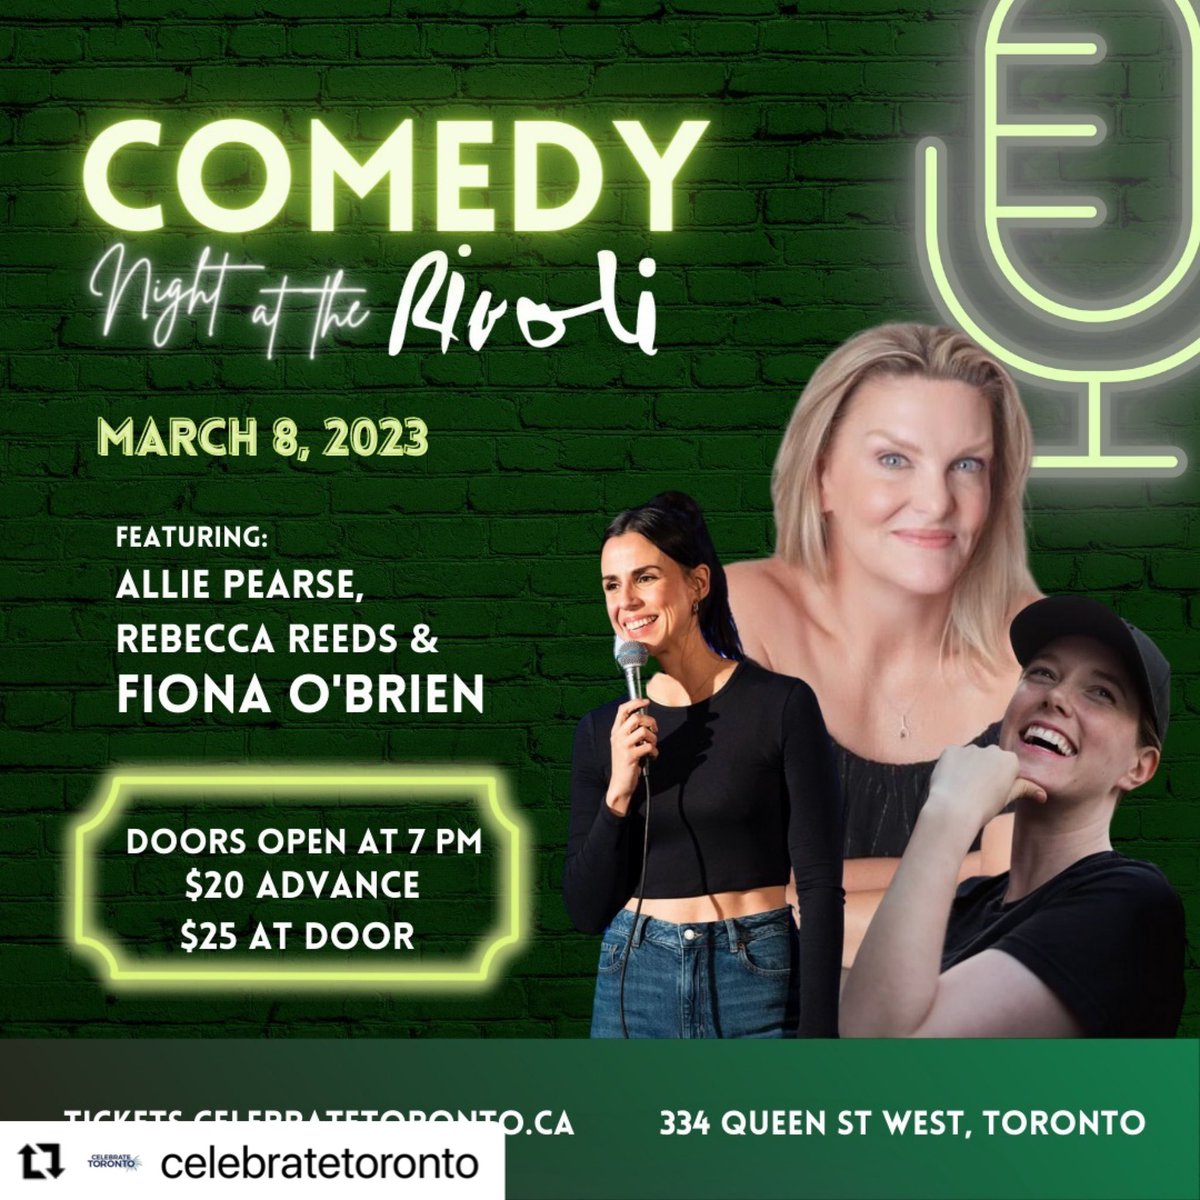 Hello I’ll be here on March 8th with these fabulous people @RivoliToronto come and say hello #livecomedy #Irish #IrishHeritageMonth 🇮🇪❤️🇨🇦🇮🇪☘️